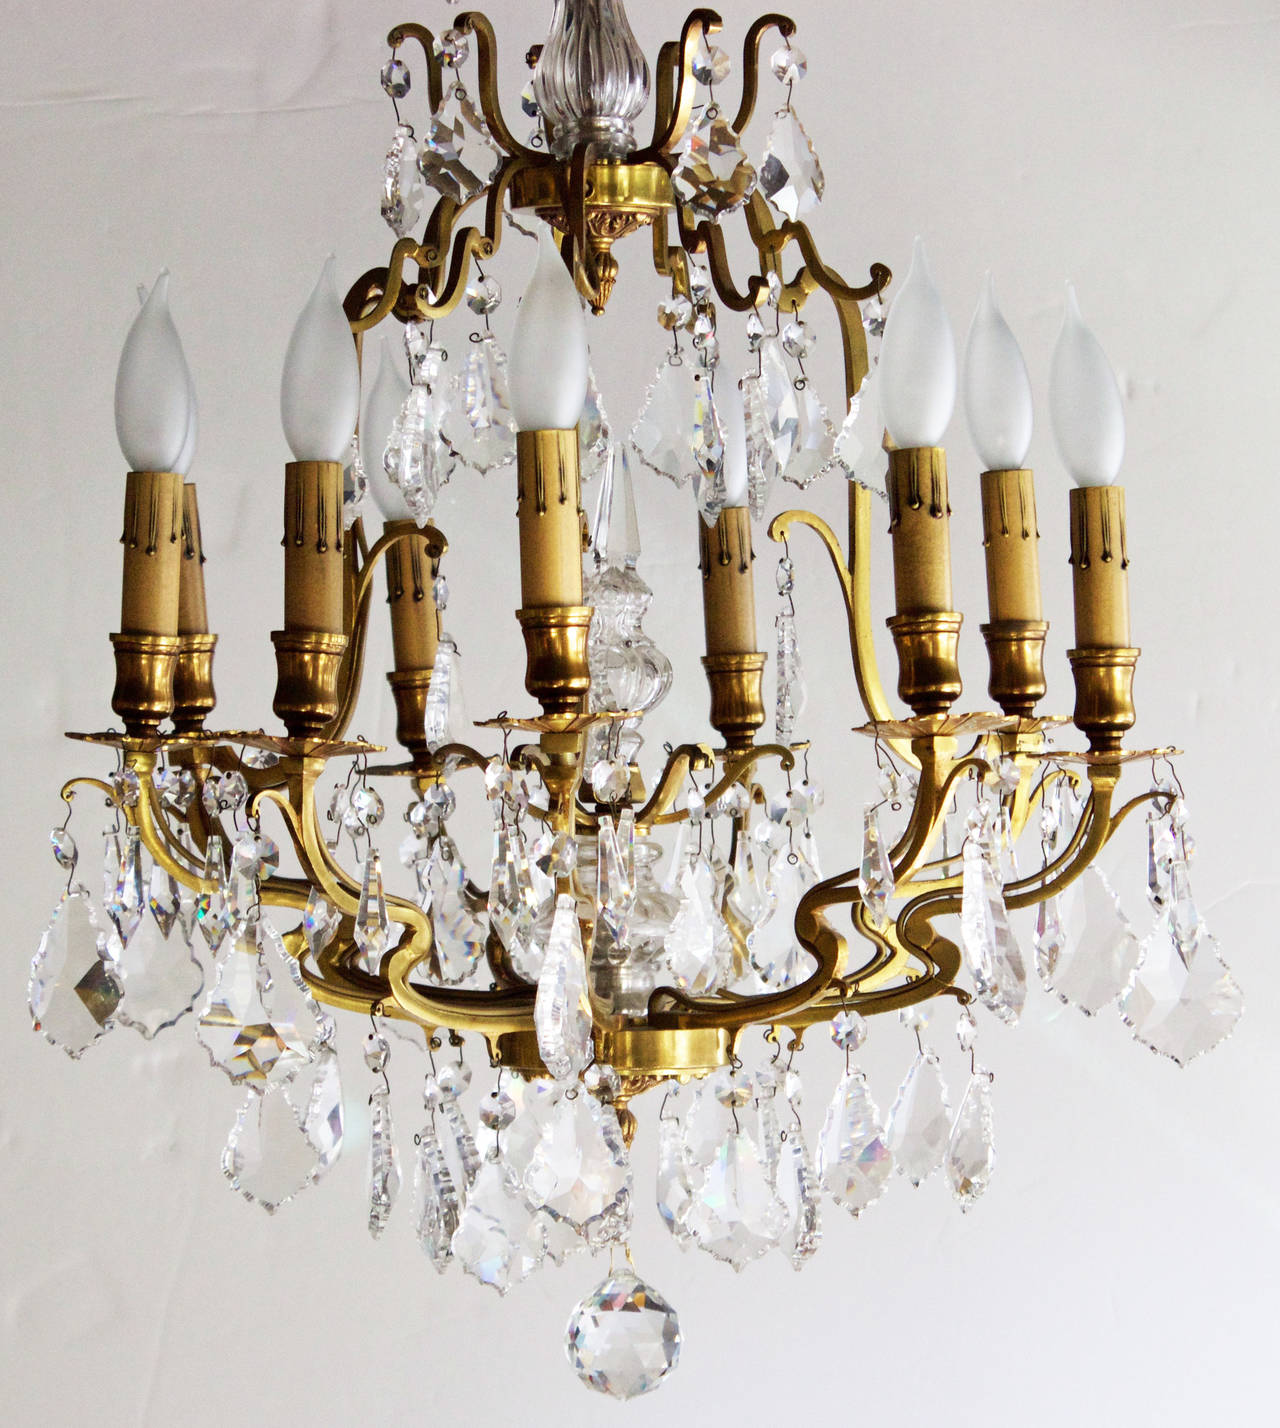 Very elegant chandeliers in typical Louis XV "Birdcage" st. each deploys around a gilded bronze structure made of four stems holding a bobeche but also linking the bottom canopy to the one above and four shorter stems holding simply the